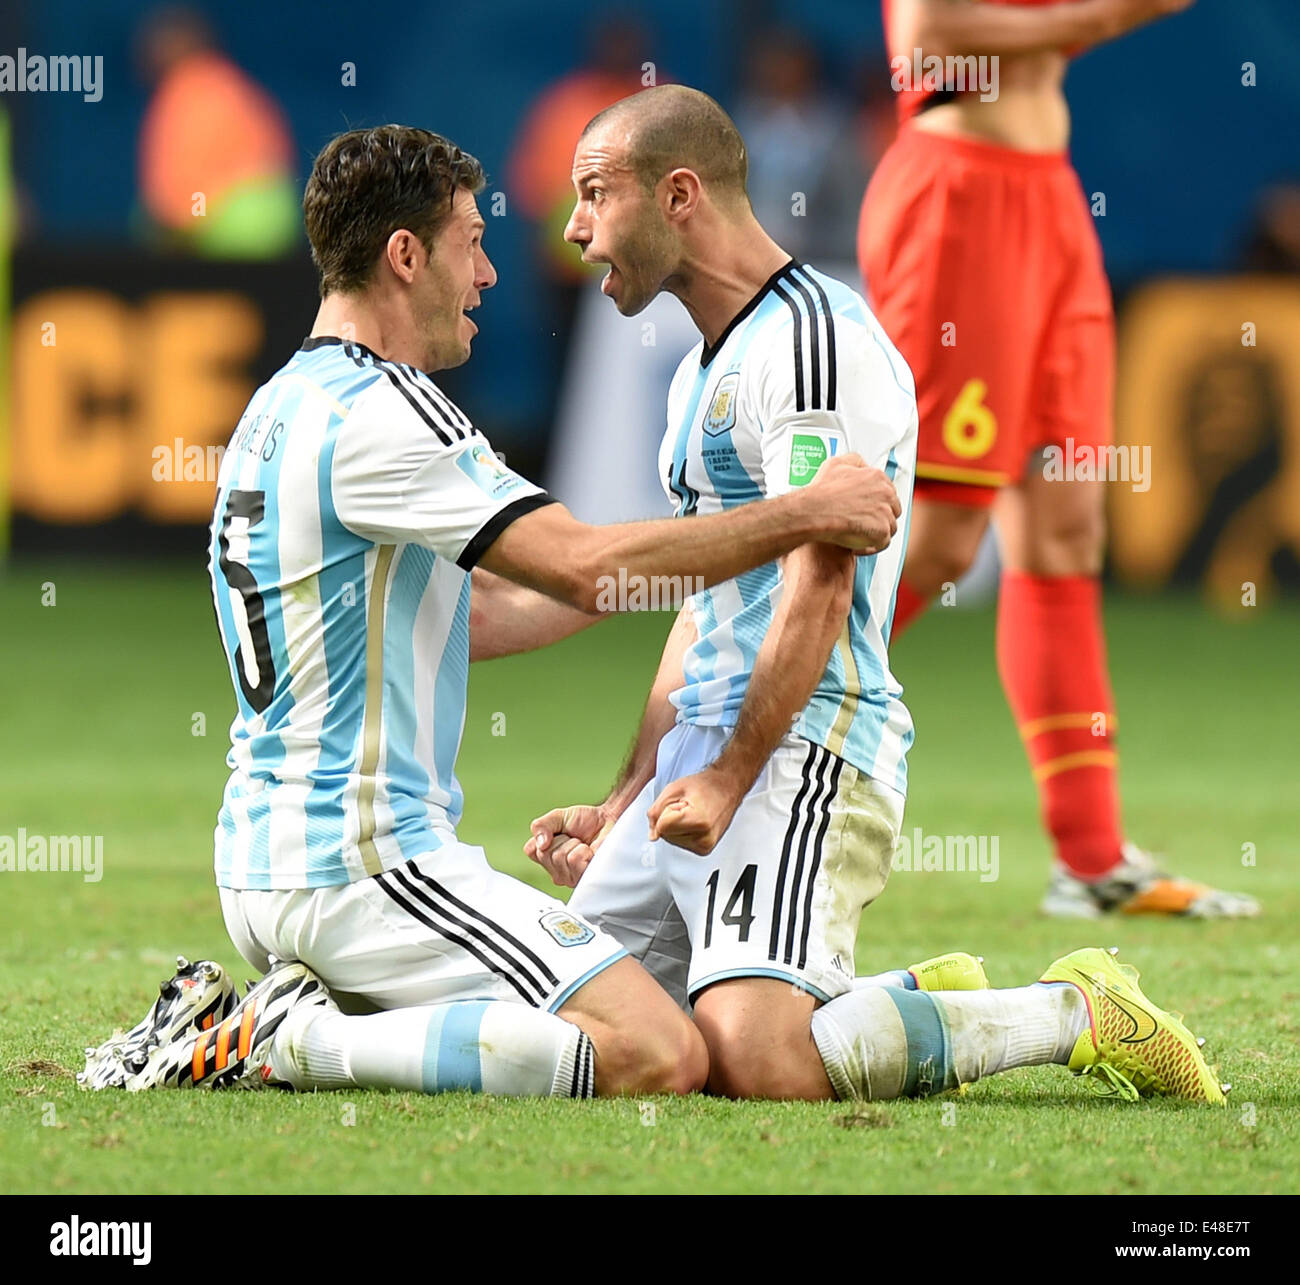 Brasilia, Brazil. 5th July, 2014. Argentina's Martin Demichelis (L) and Javier Mascherano celebrate the victory after a quarter-finals match between Argentina and Belgium of 2014 FIFA World Cup at the Estadio Nacional Stadium in Brasilia, Brazil, on July 5, 2014. Argentina won 1-0 over Belgium and qualified for the semi-finals. Credit:  Liu Dawei/Xinhua/Alamy Live News Stock Photo